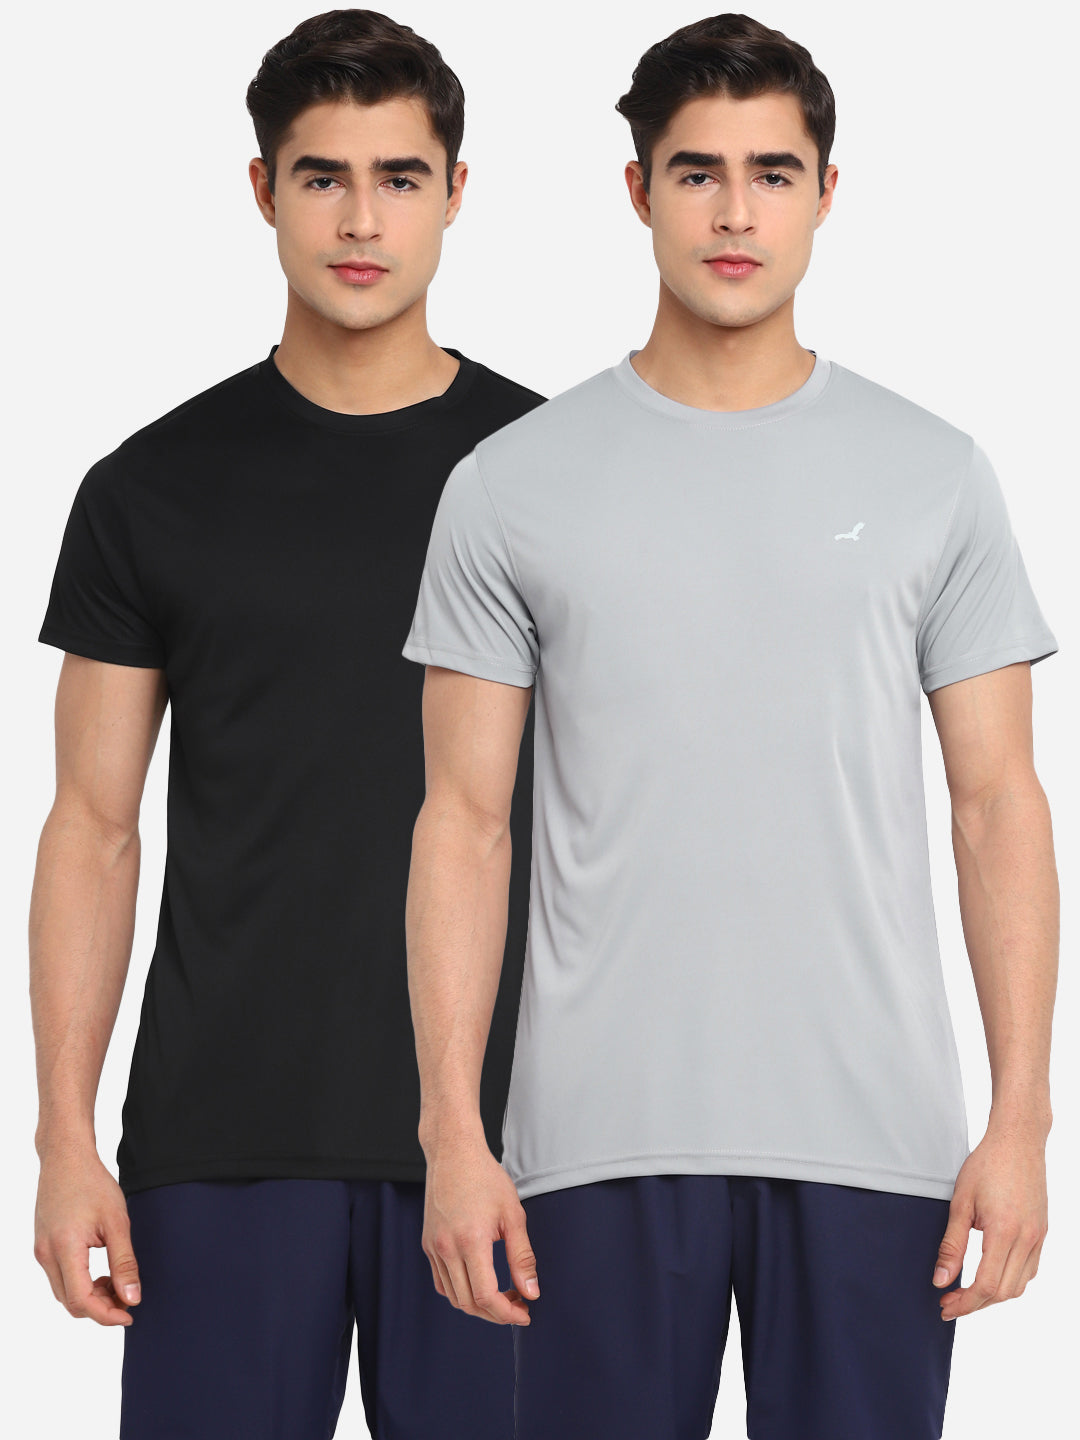 Sports Kooltex Round Neck T-Shirts for Men Pack of 2 - Black & Grey